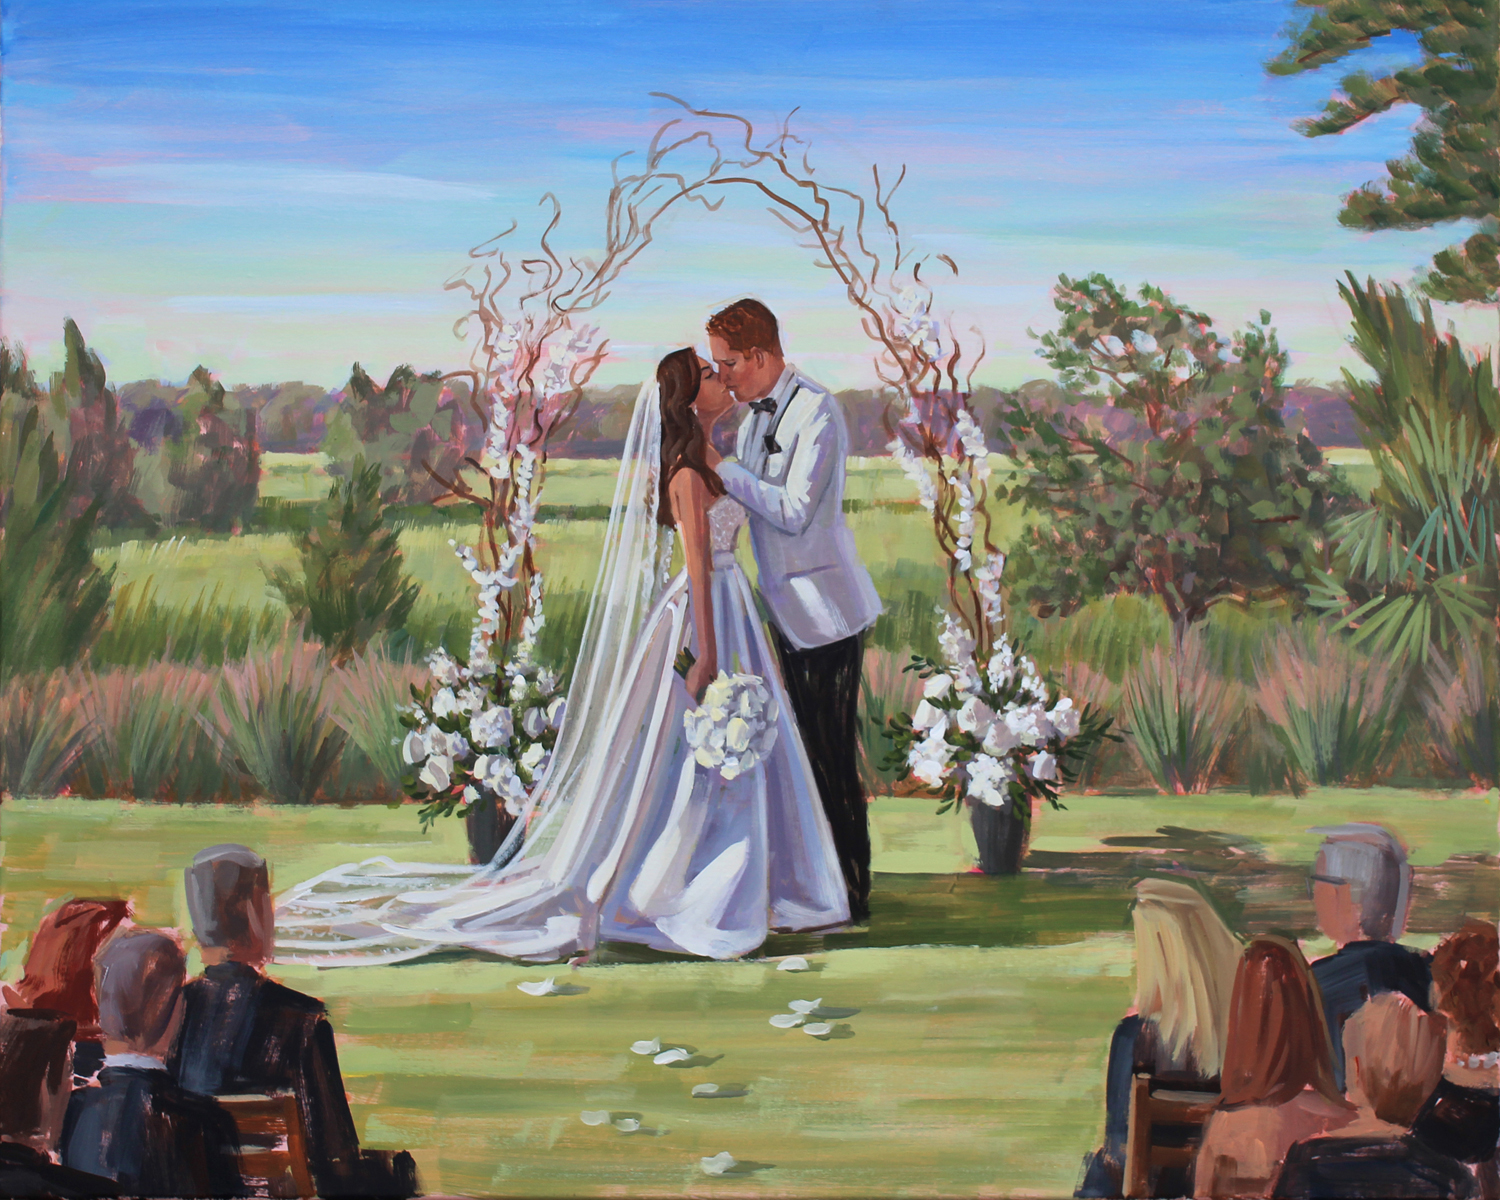 Charleston artist, Ben Keys, captured Melaina + Evan’s wedding day with a live painting of their ceremony held at Daniel Island Club.